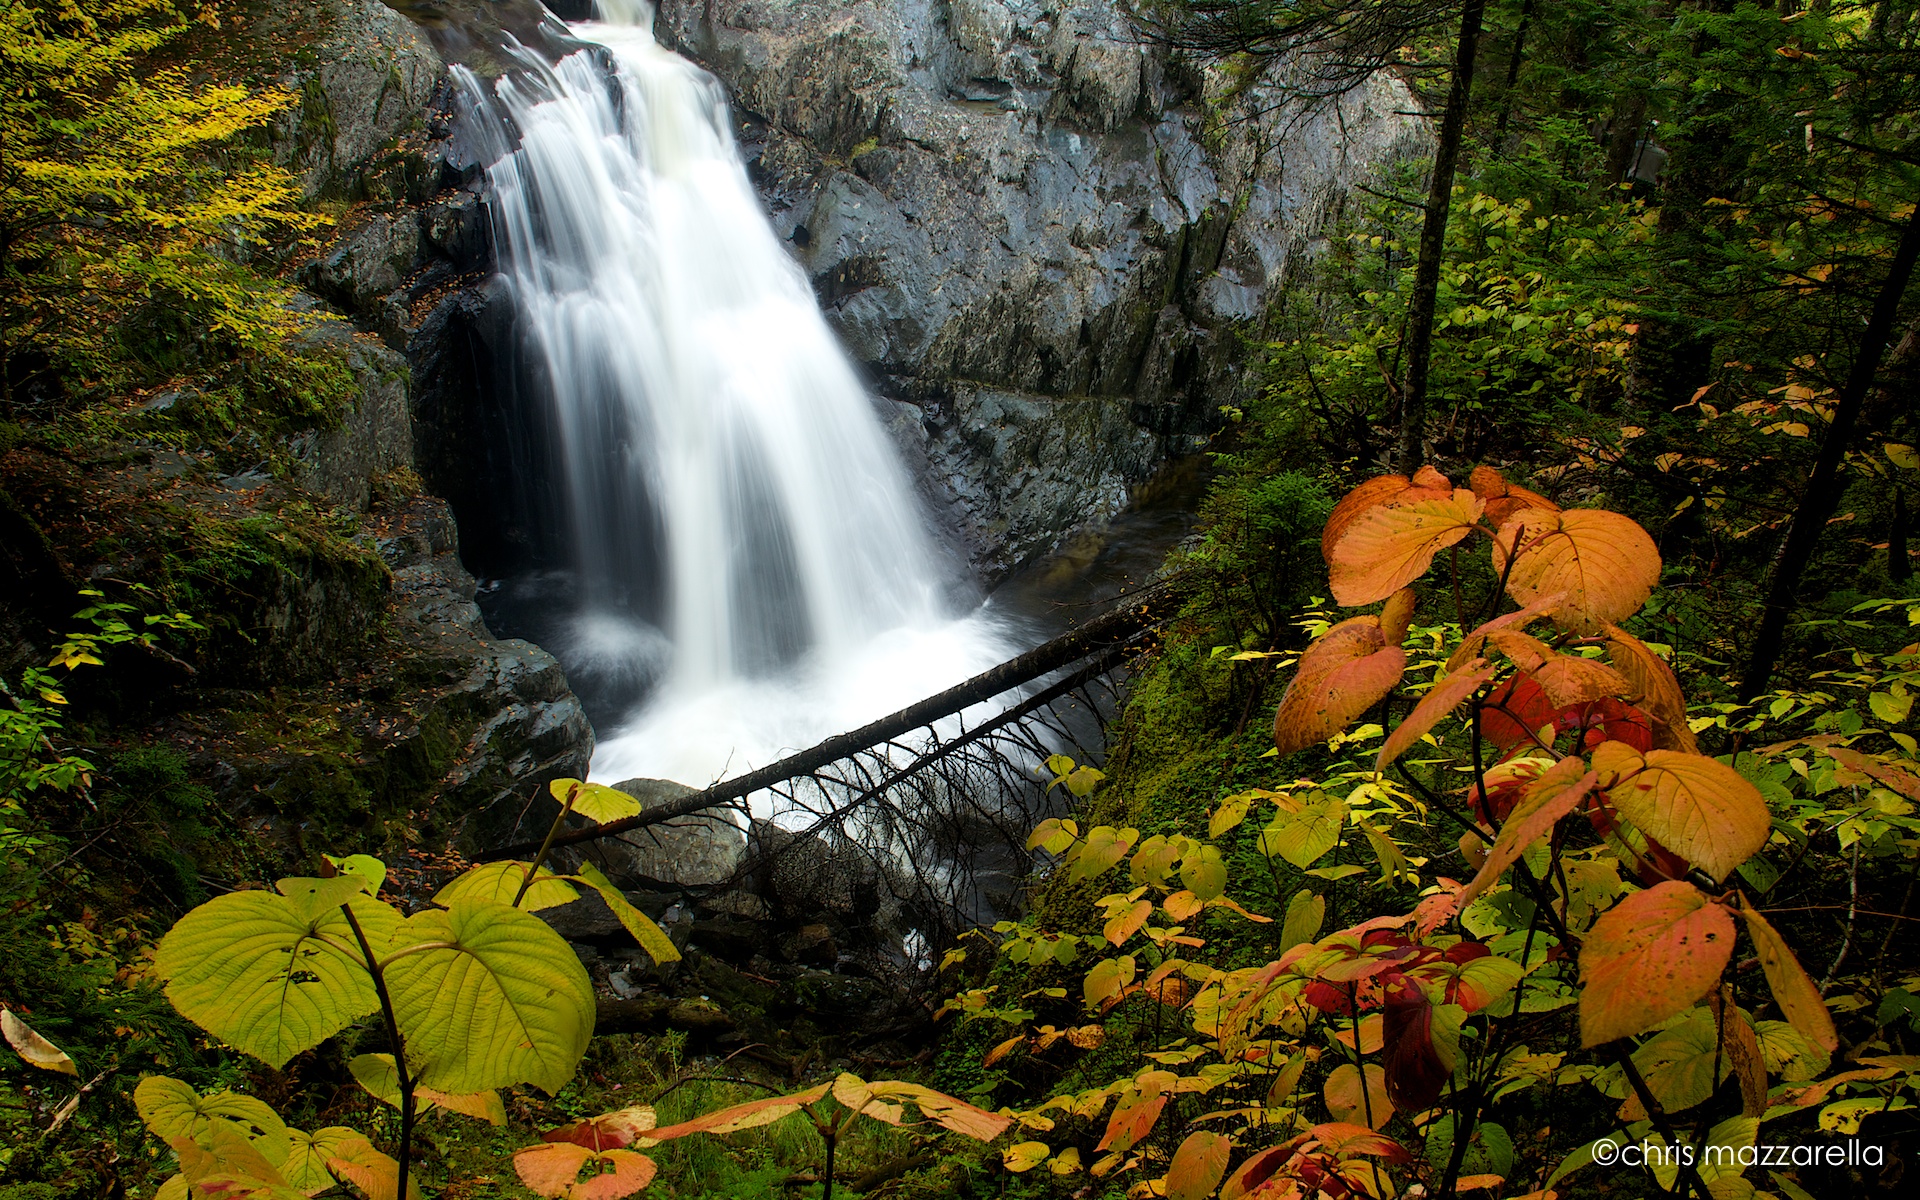 Autumn Hobblebush At Garfield Falls (user submitted)